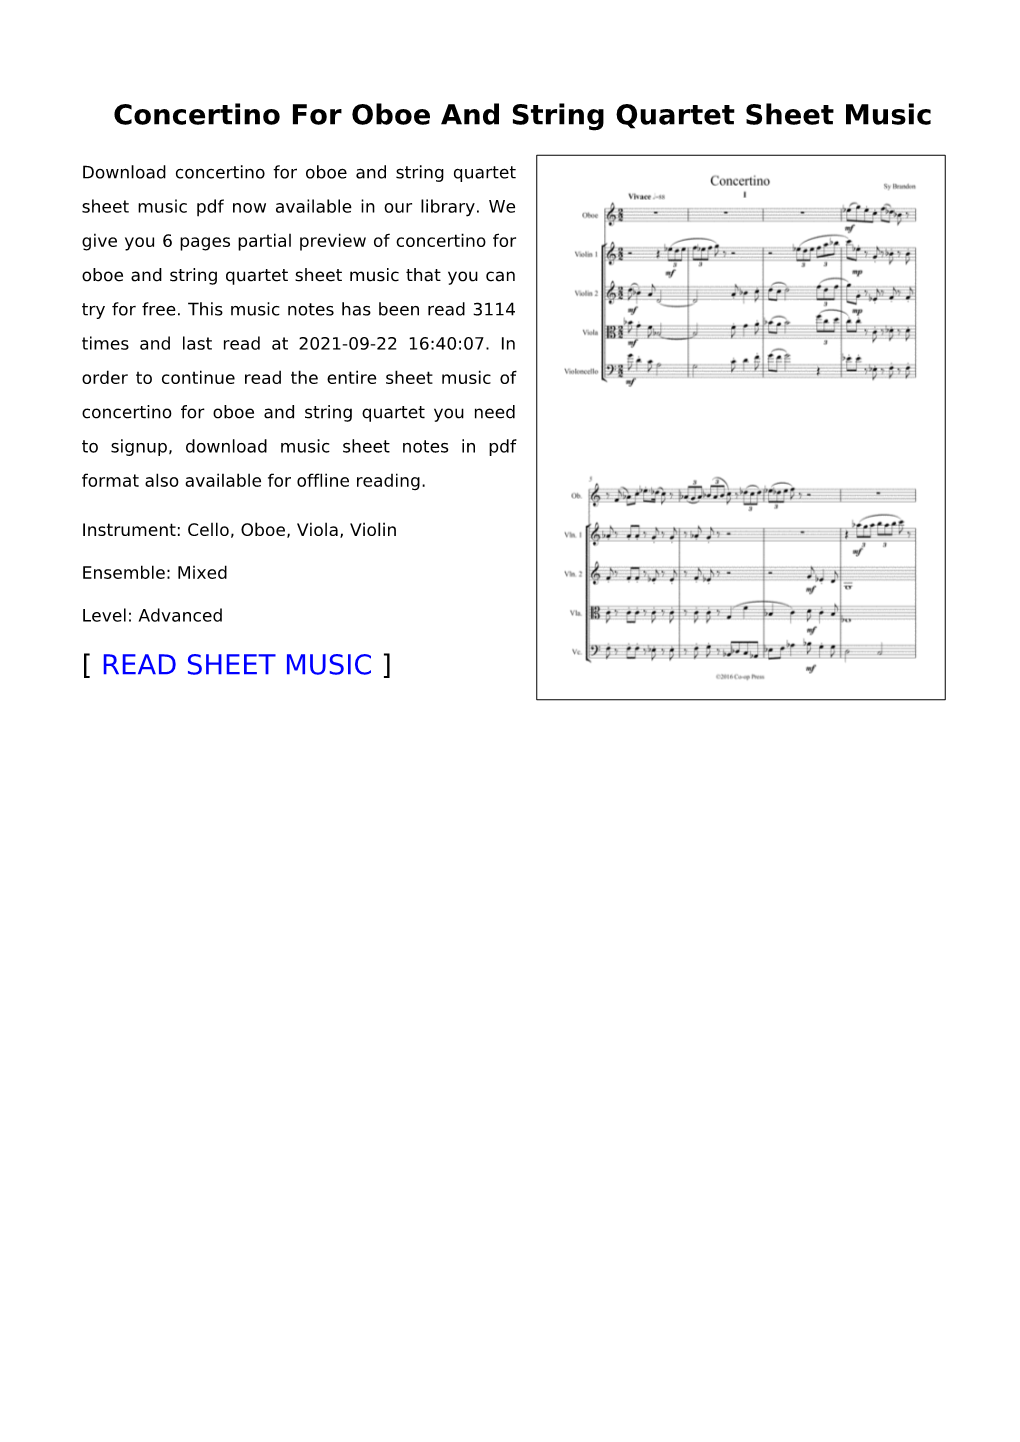 Concertino for Oboe and String Quartet Sheet Music